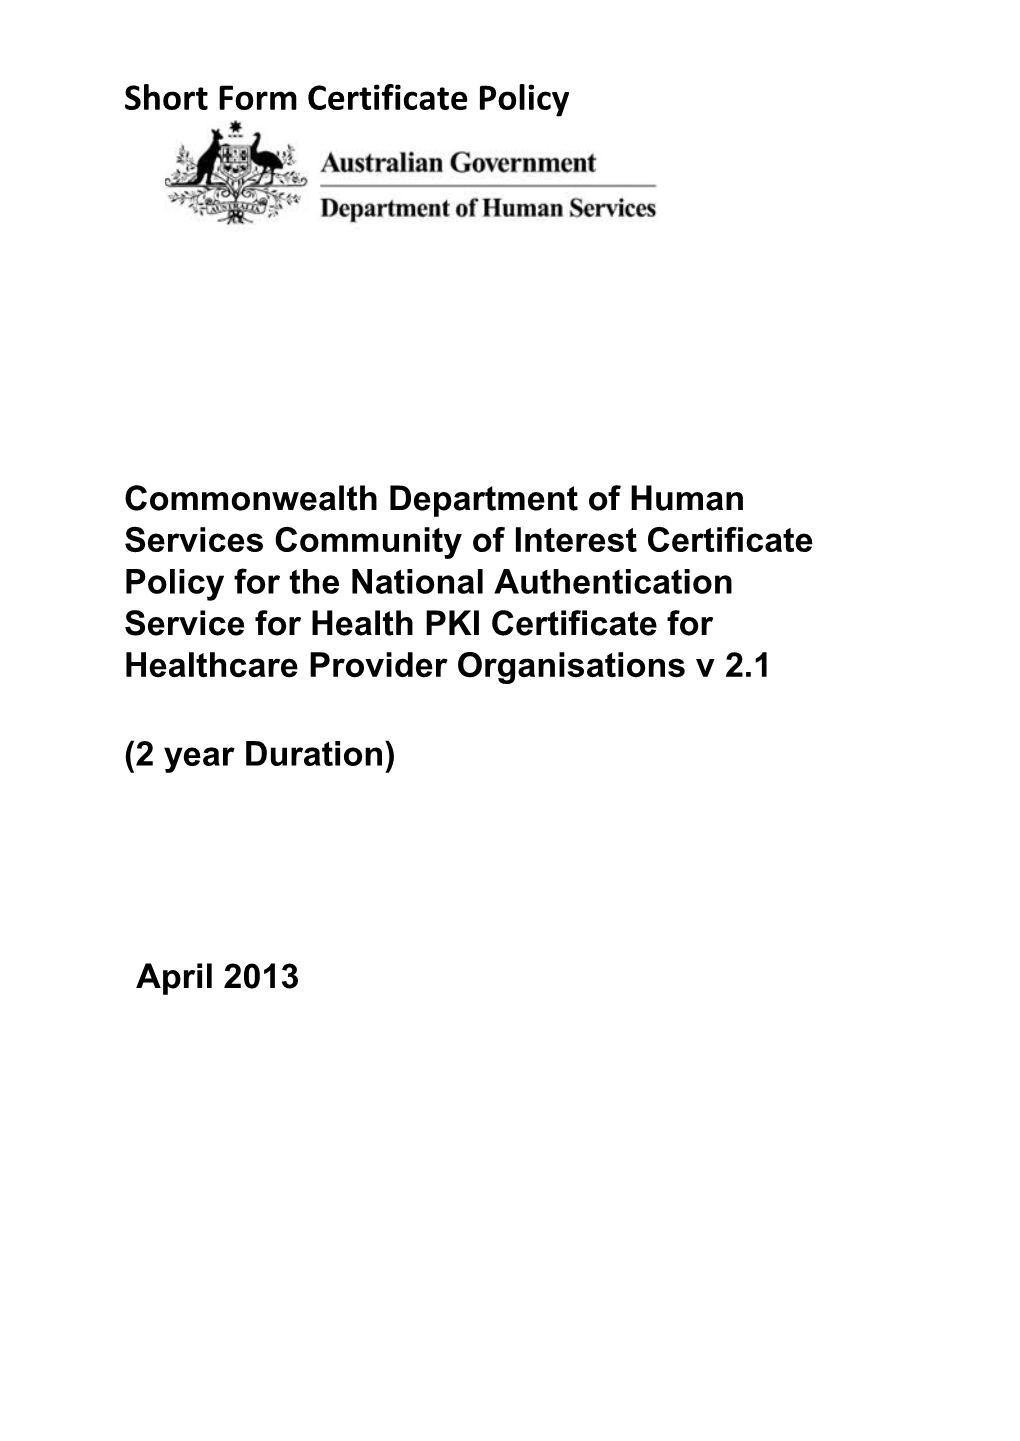 Commonwealth Department of Human Services Community of Interest Certificate Policy For s1